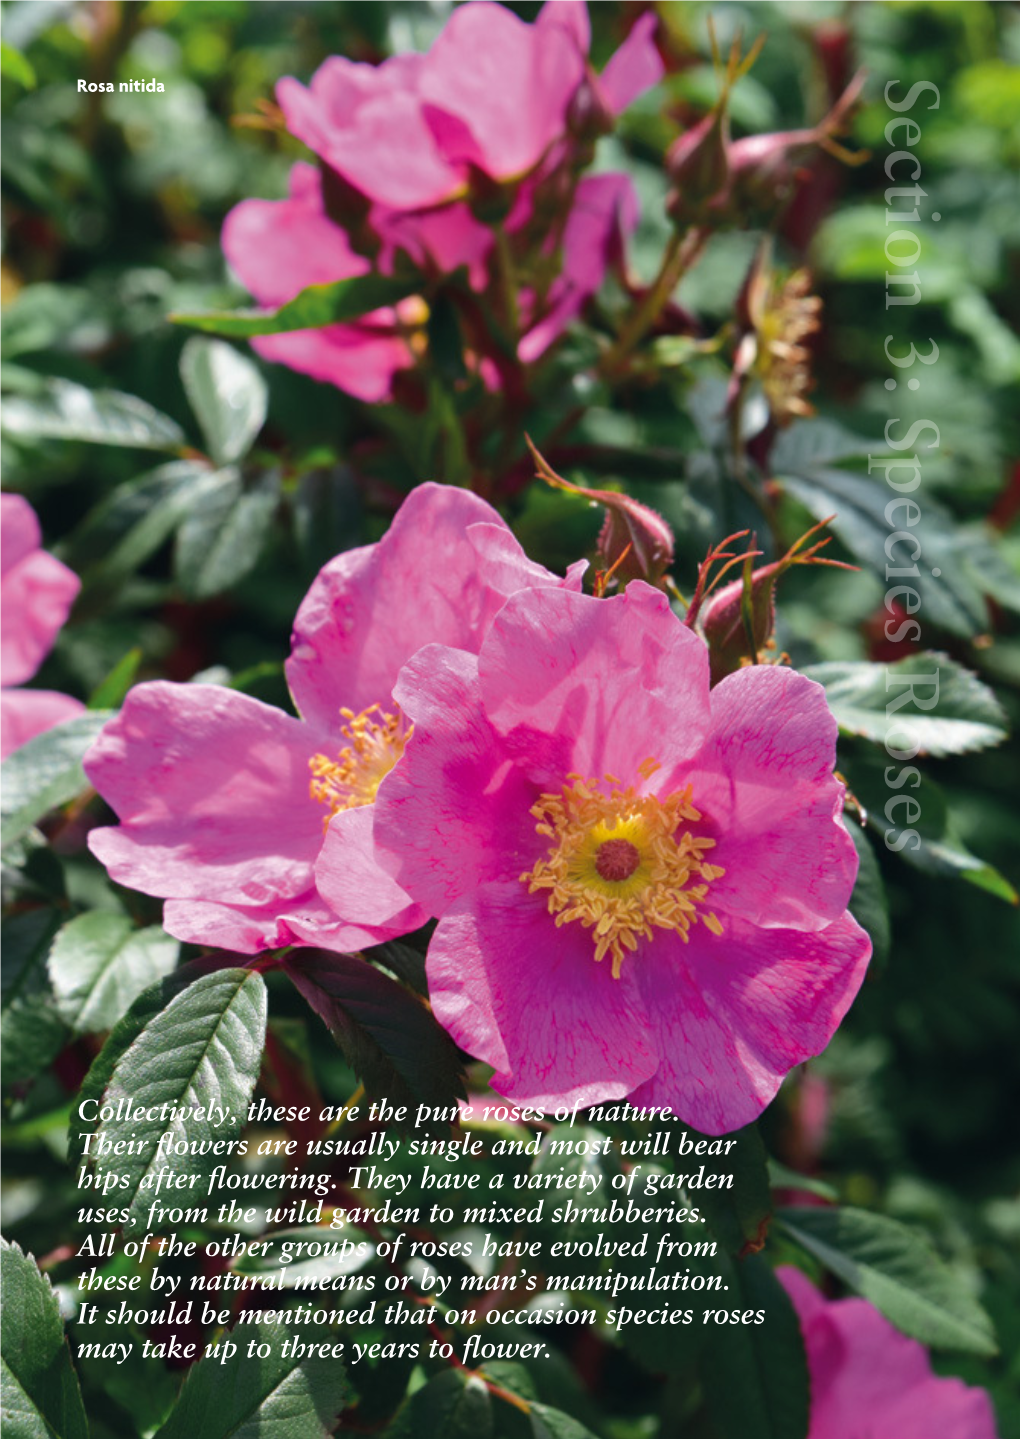 Section 3: Species Roses Rosa Nitida